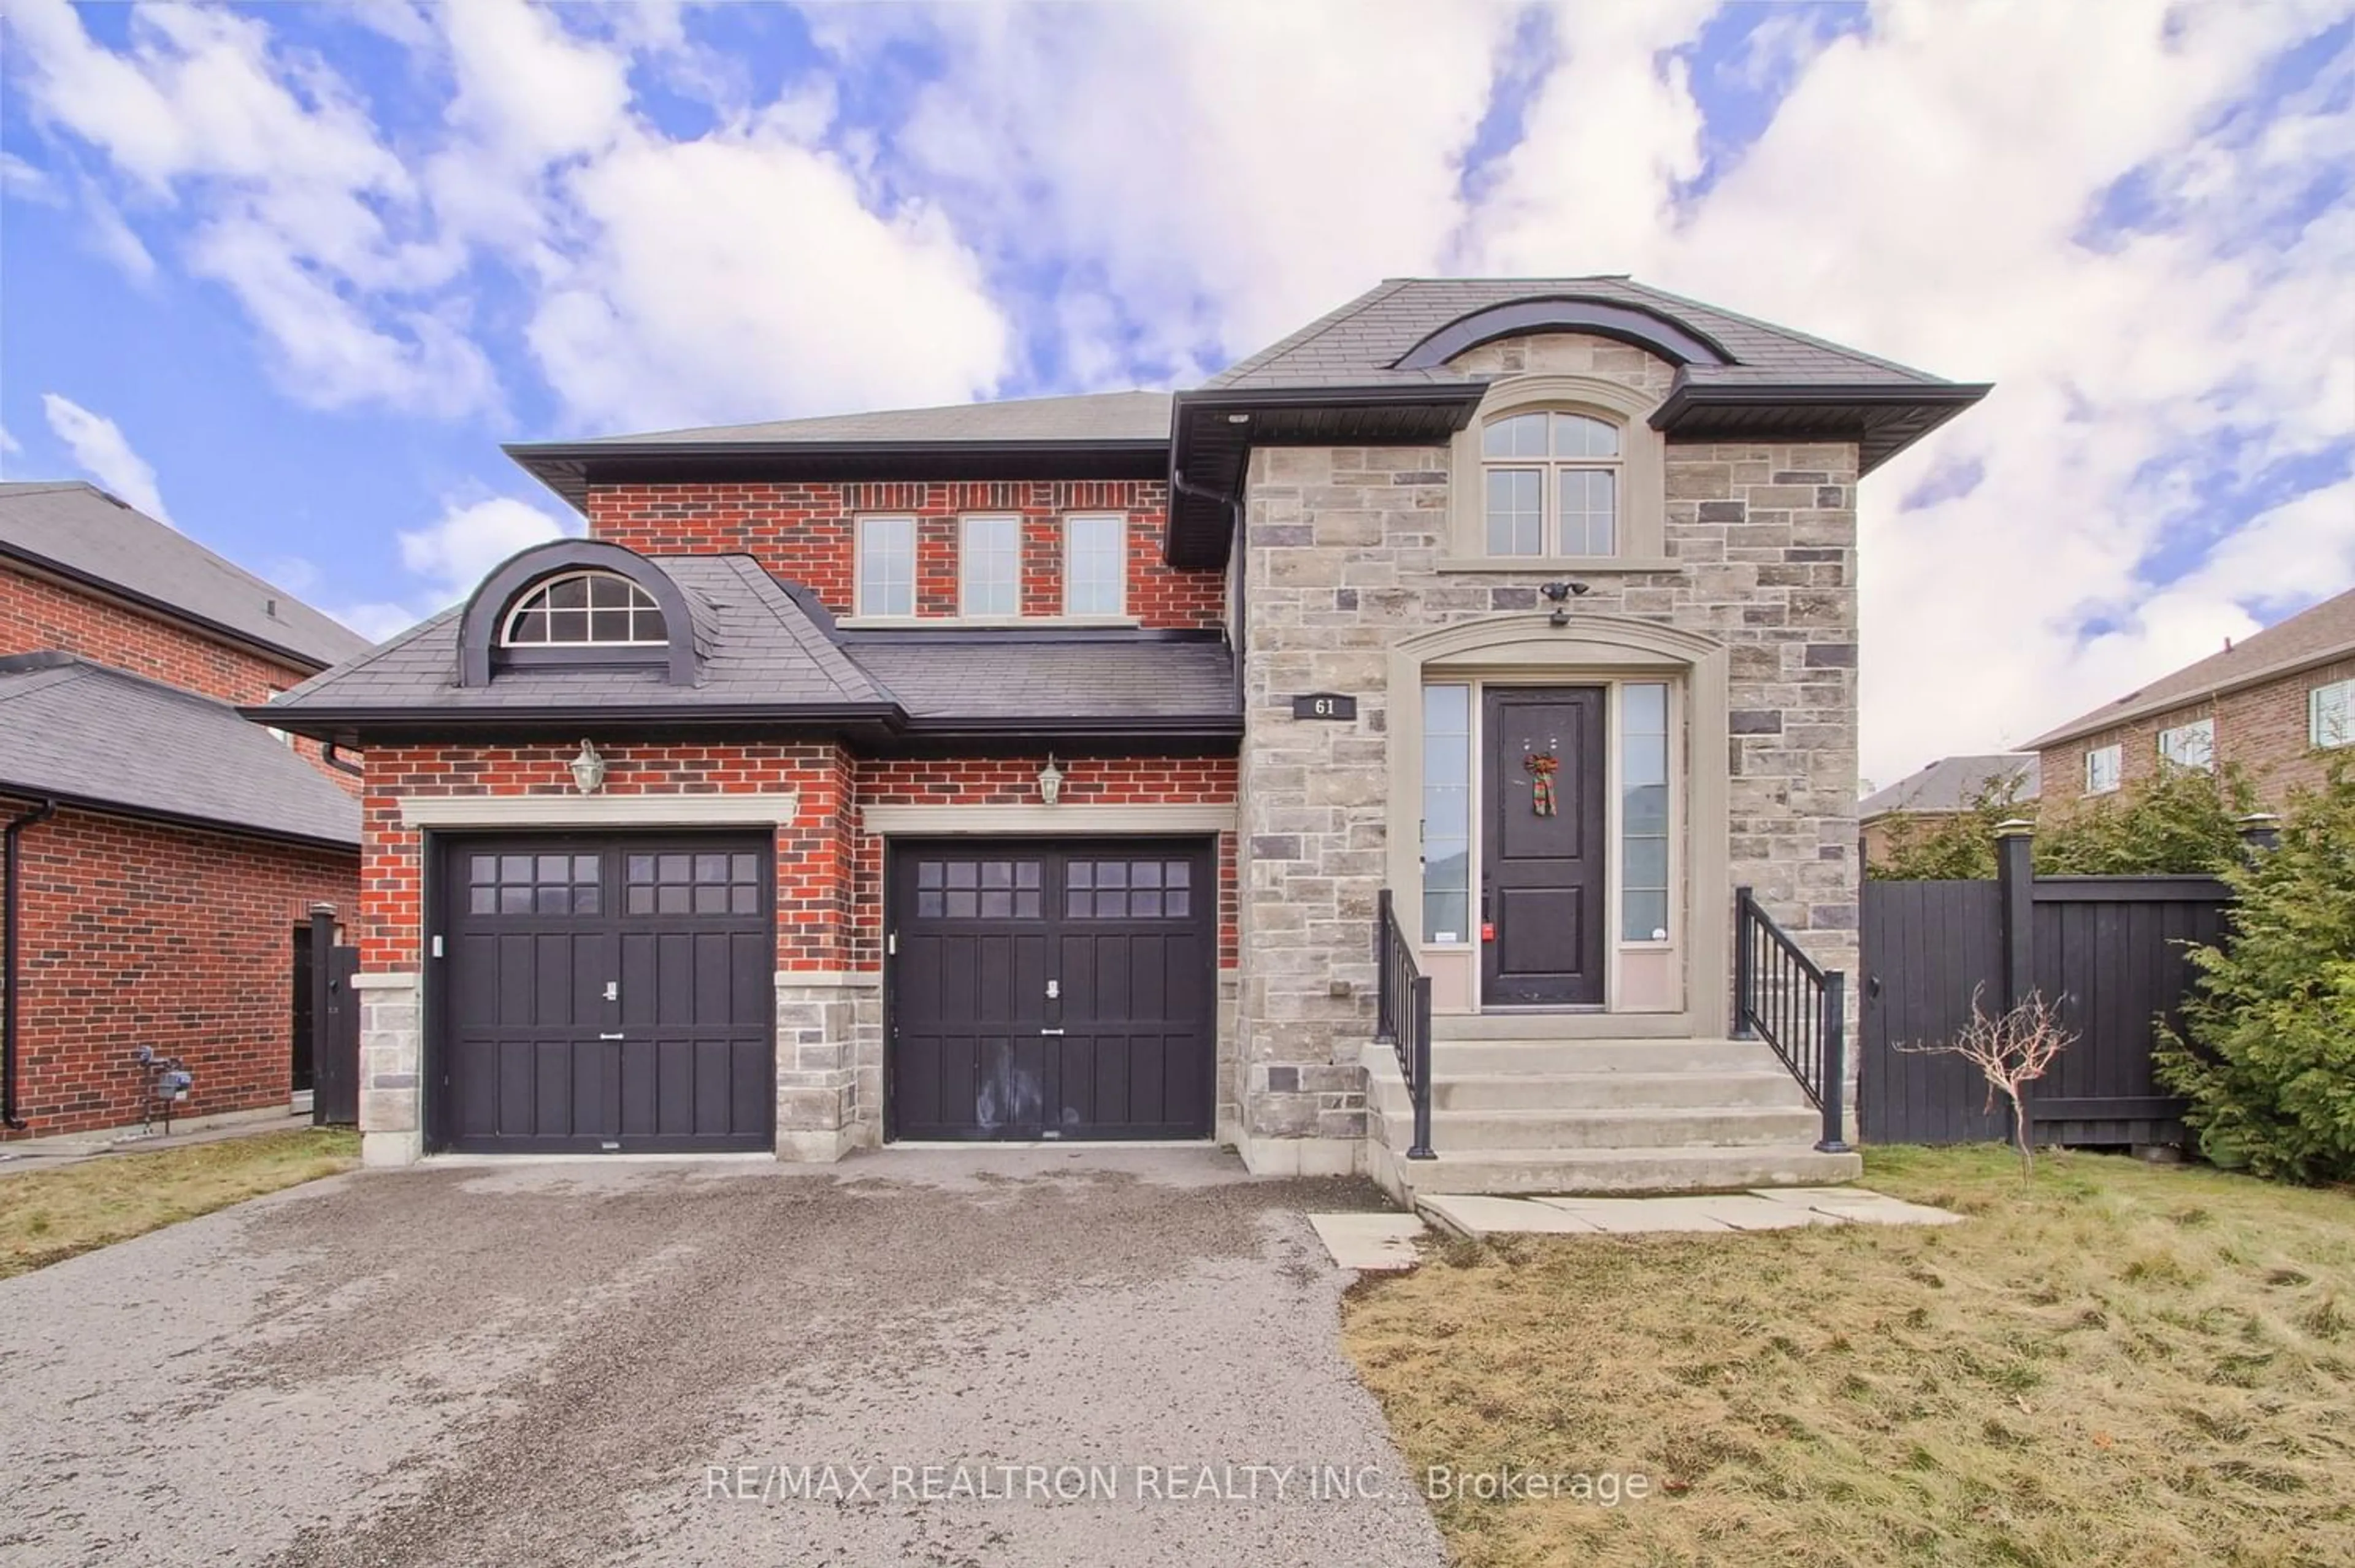 Home with brick exterior material for 61 Bannerman Dr, Bradford West Gwillimbury Ontario L3Z 3J4